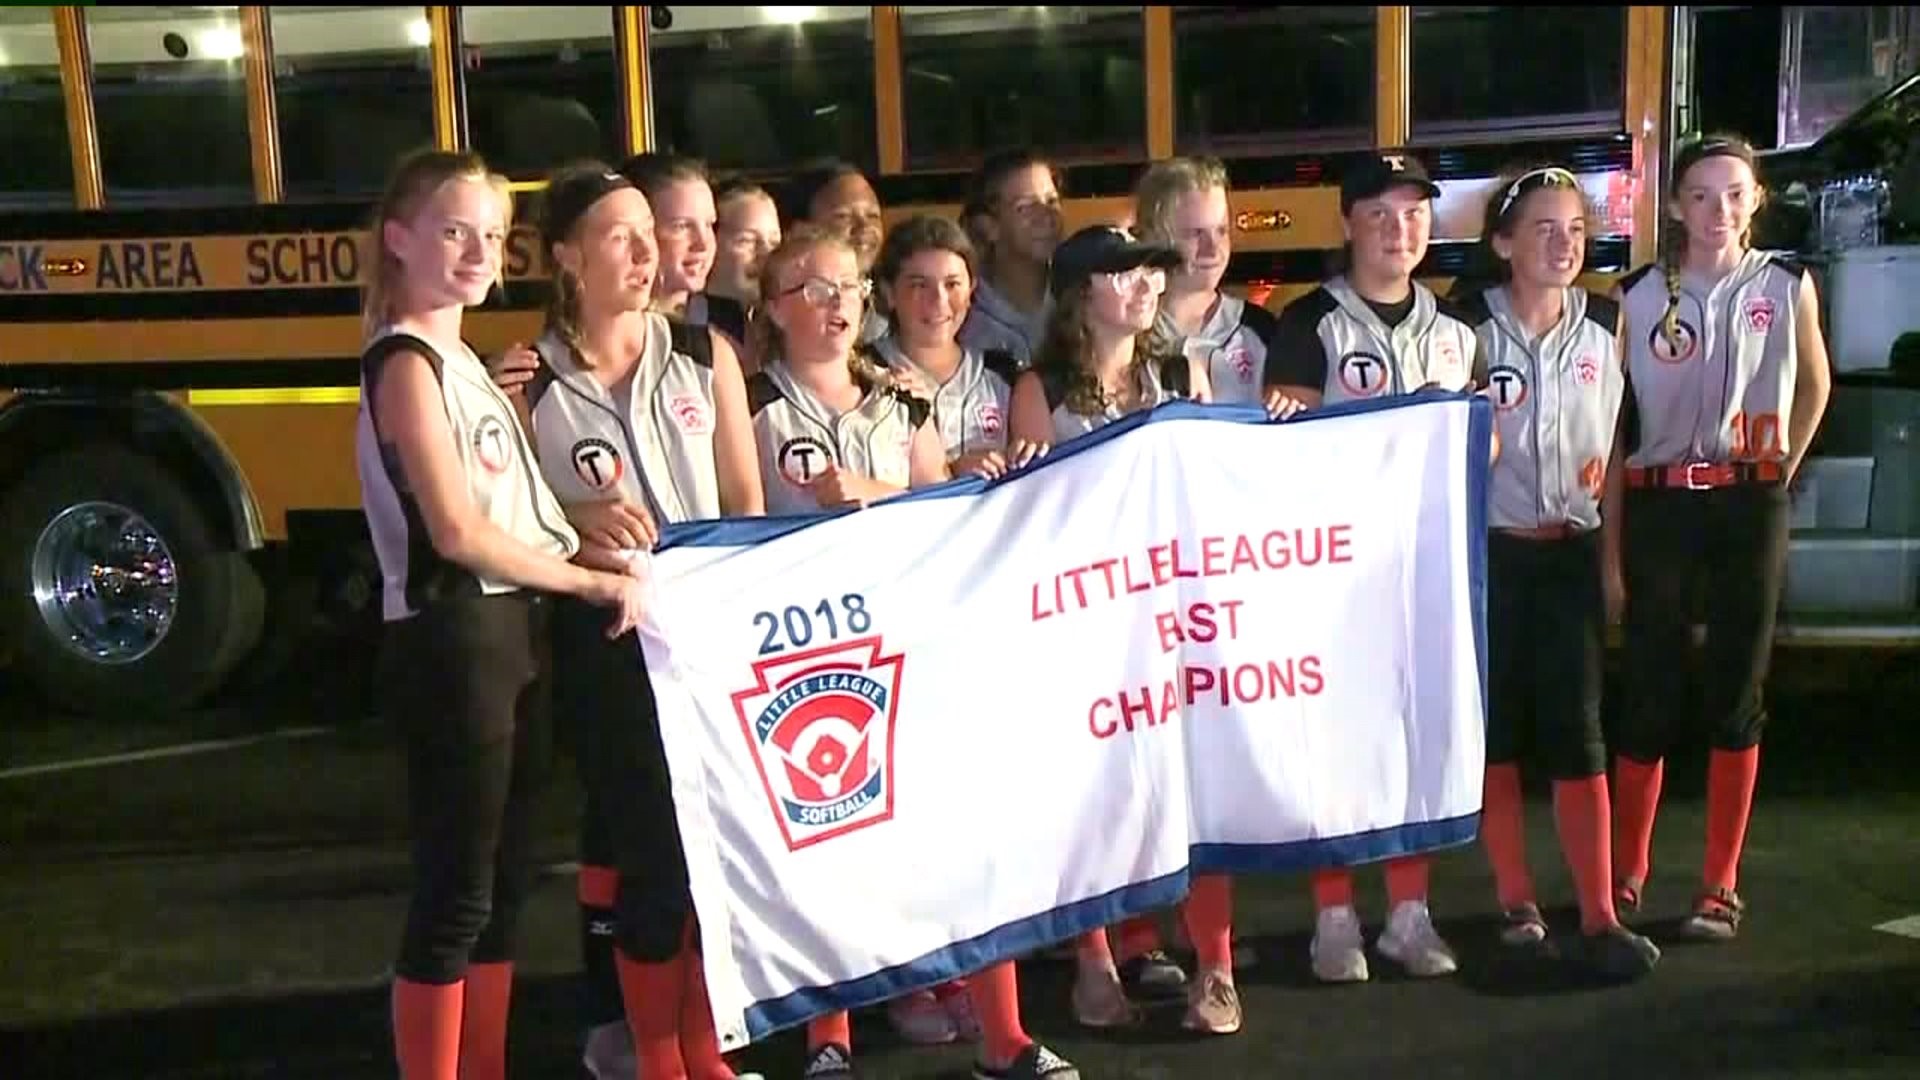 Welcome Home Parade for Girls Softball Champs in Tunkhannock